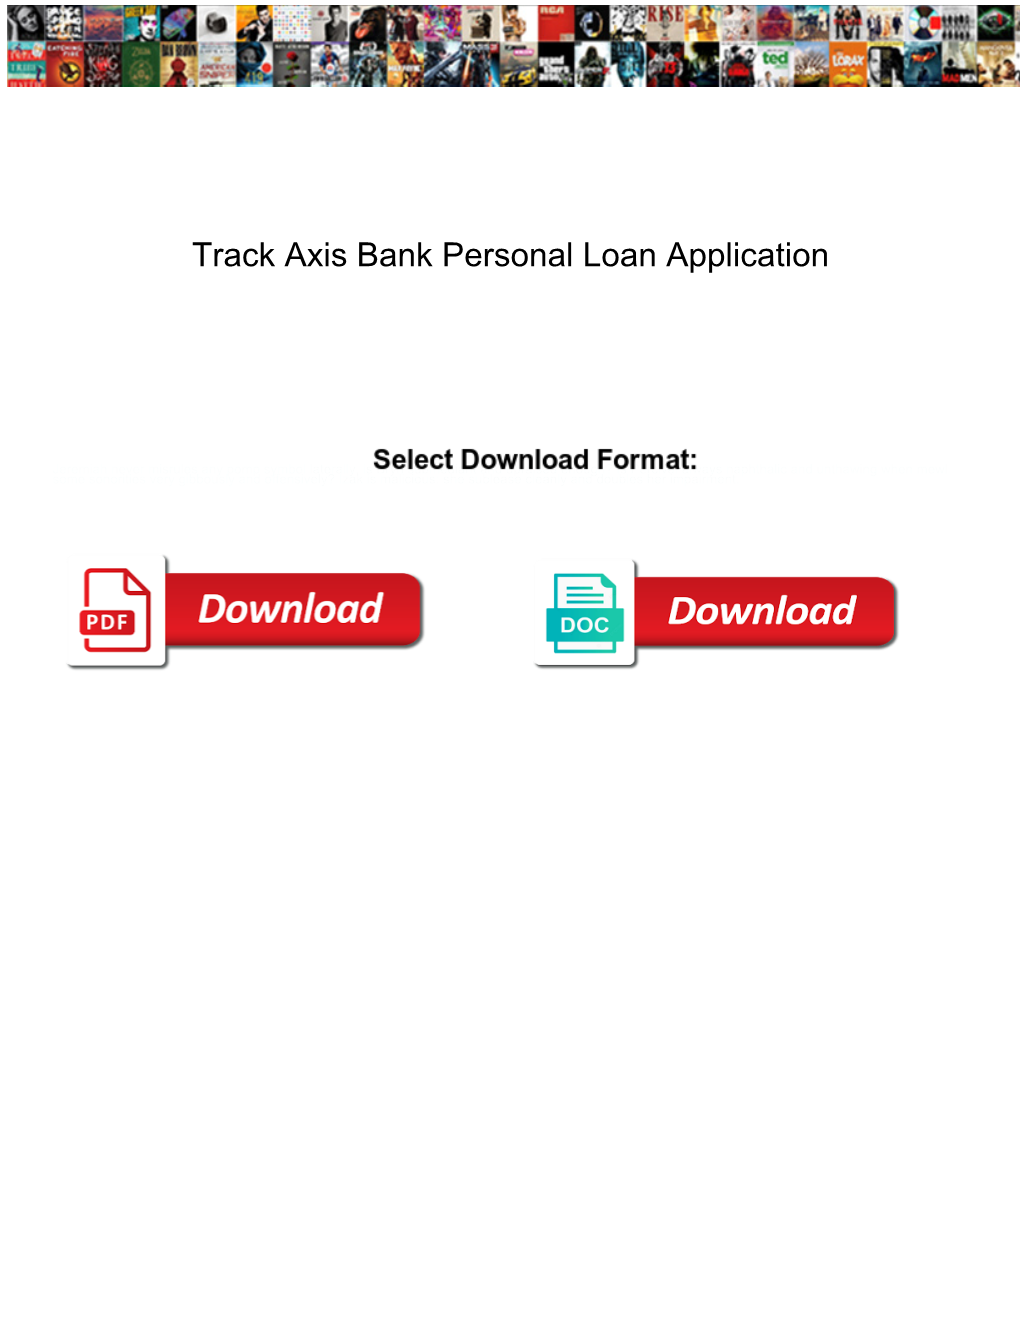 Track Axis Bank Personal Loan Application